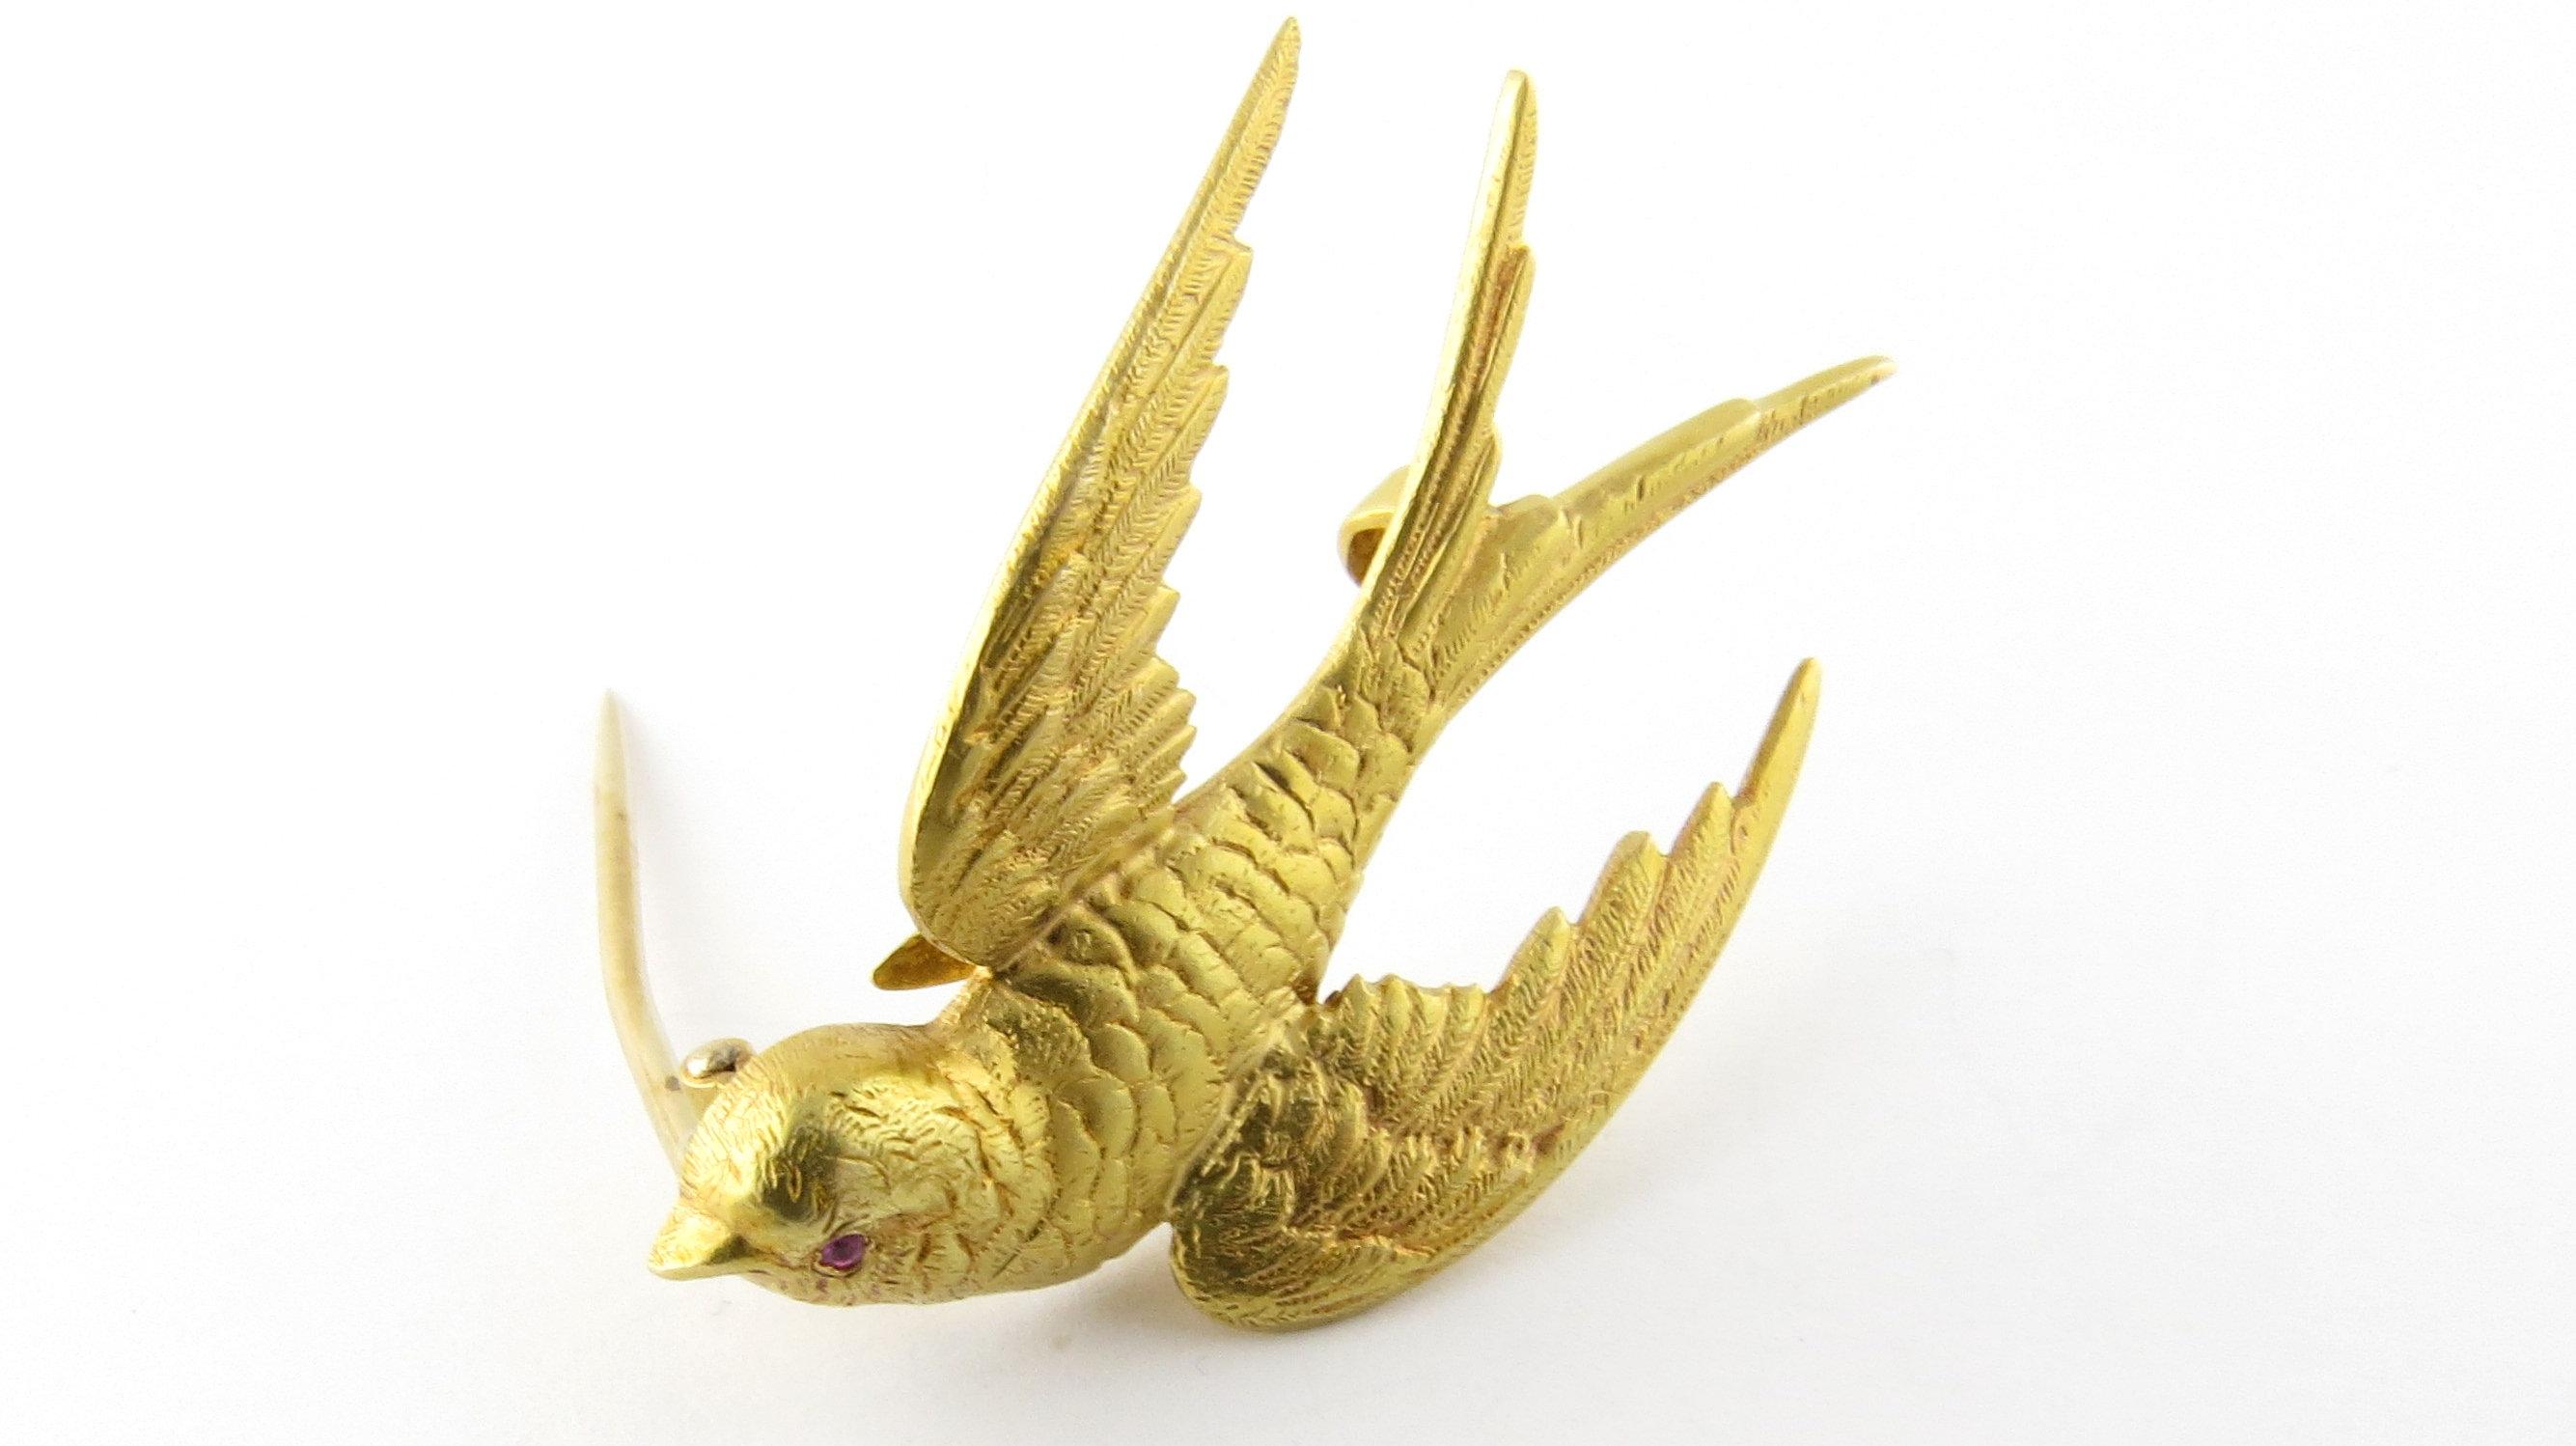 Antique Victorian 14 Karat Yellow Gold and Ruby Barn Swallow Brooch-

This lovely brooch was produced by The Riker Brothers Firm, an American jewelry company in the early 1900's who were known for their bird pendants and brooches. This piece depicts